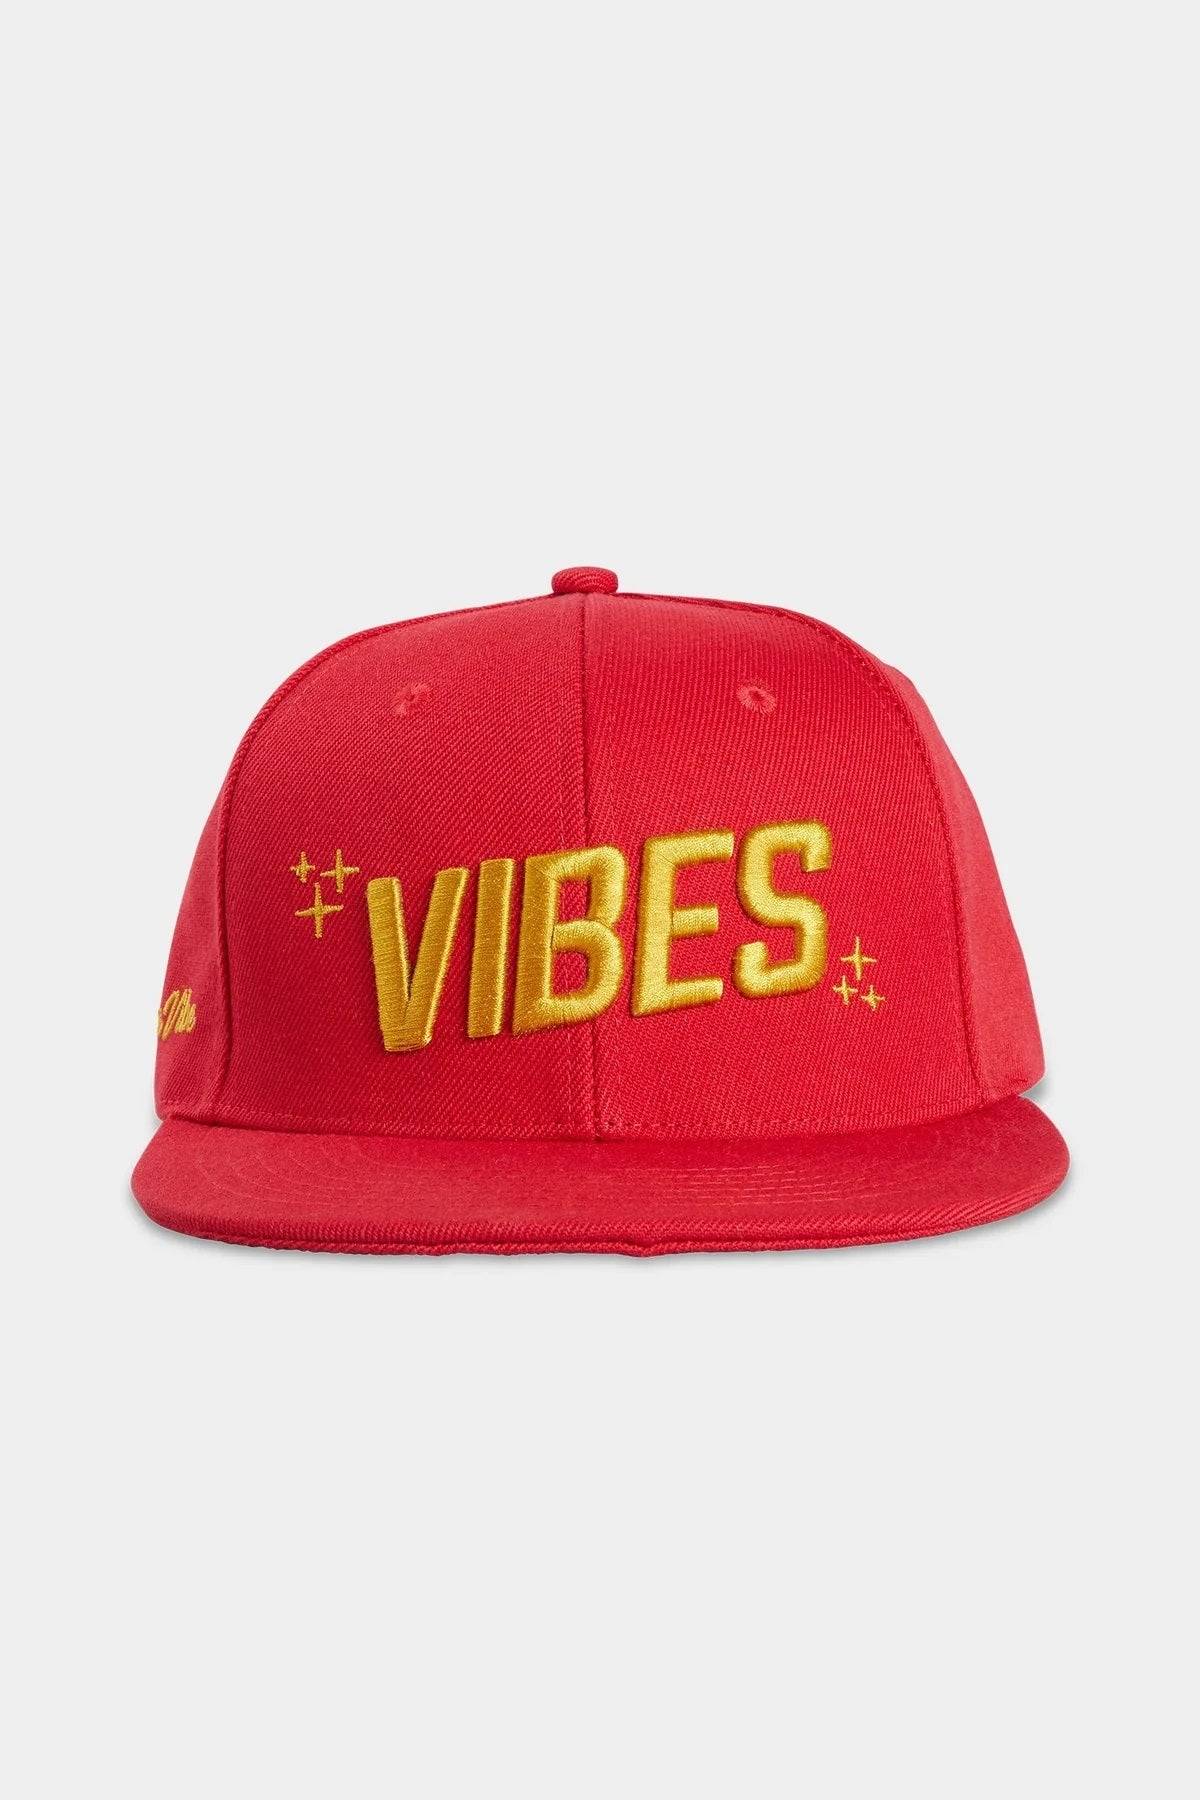 VIBES Red Snap Back Hat With Gold Logo